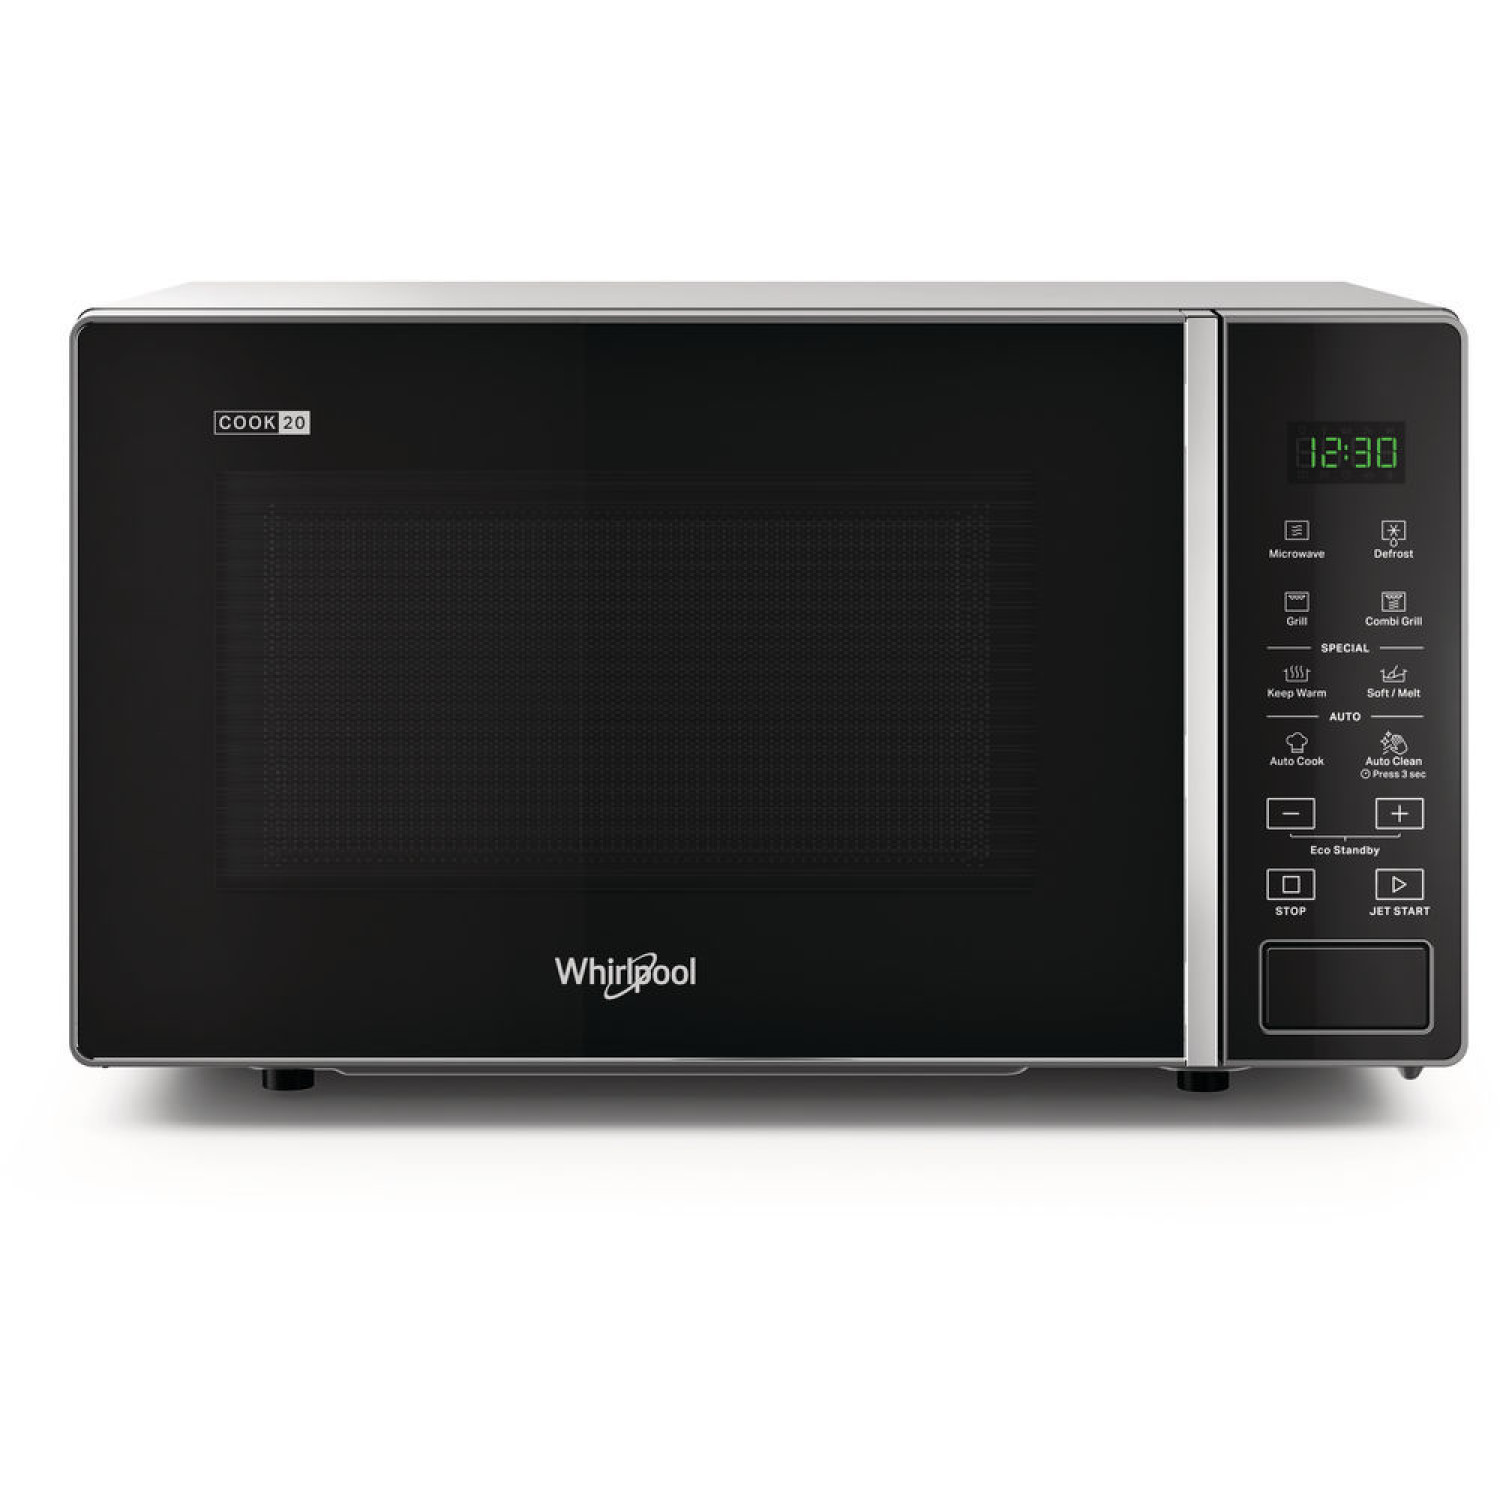 MICROONDE CON GRILL WHIRLPOOL MWP203SB MICROONDE+GRILL 20LT 700W SILVER